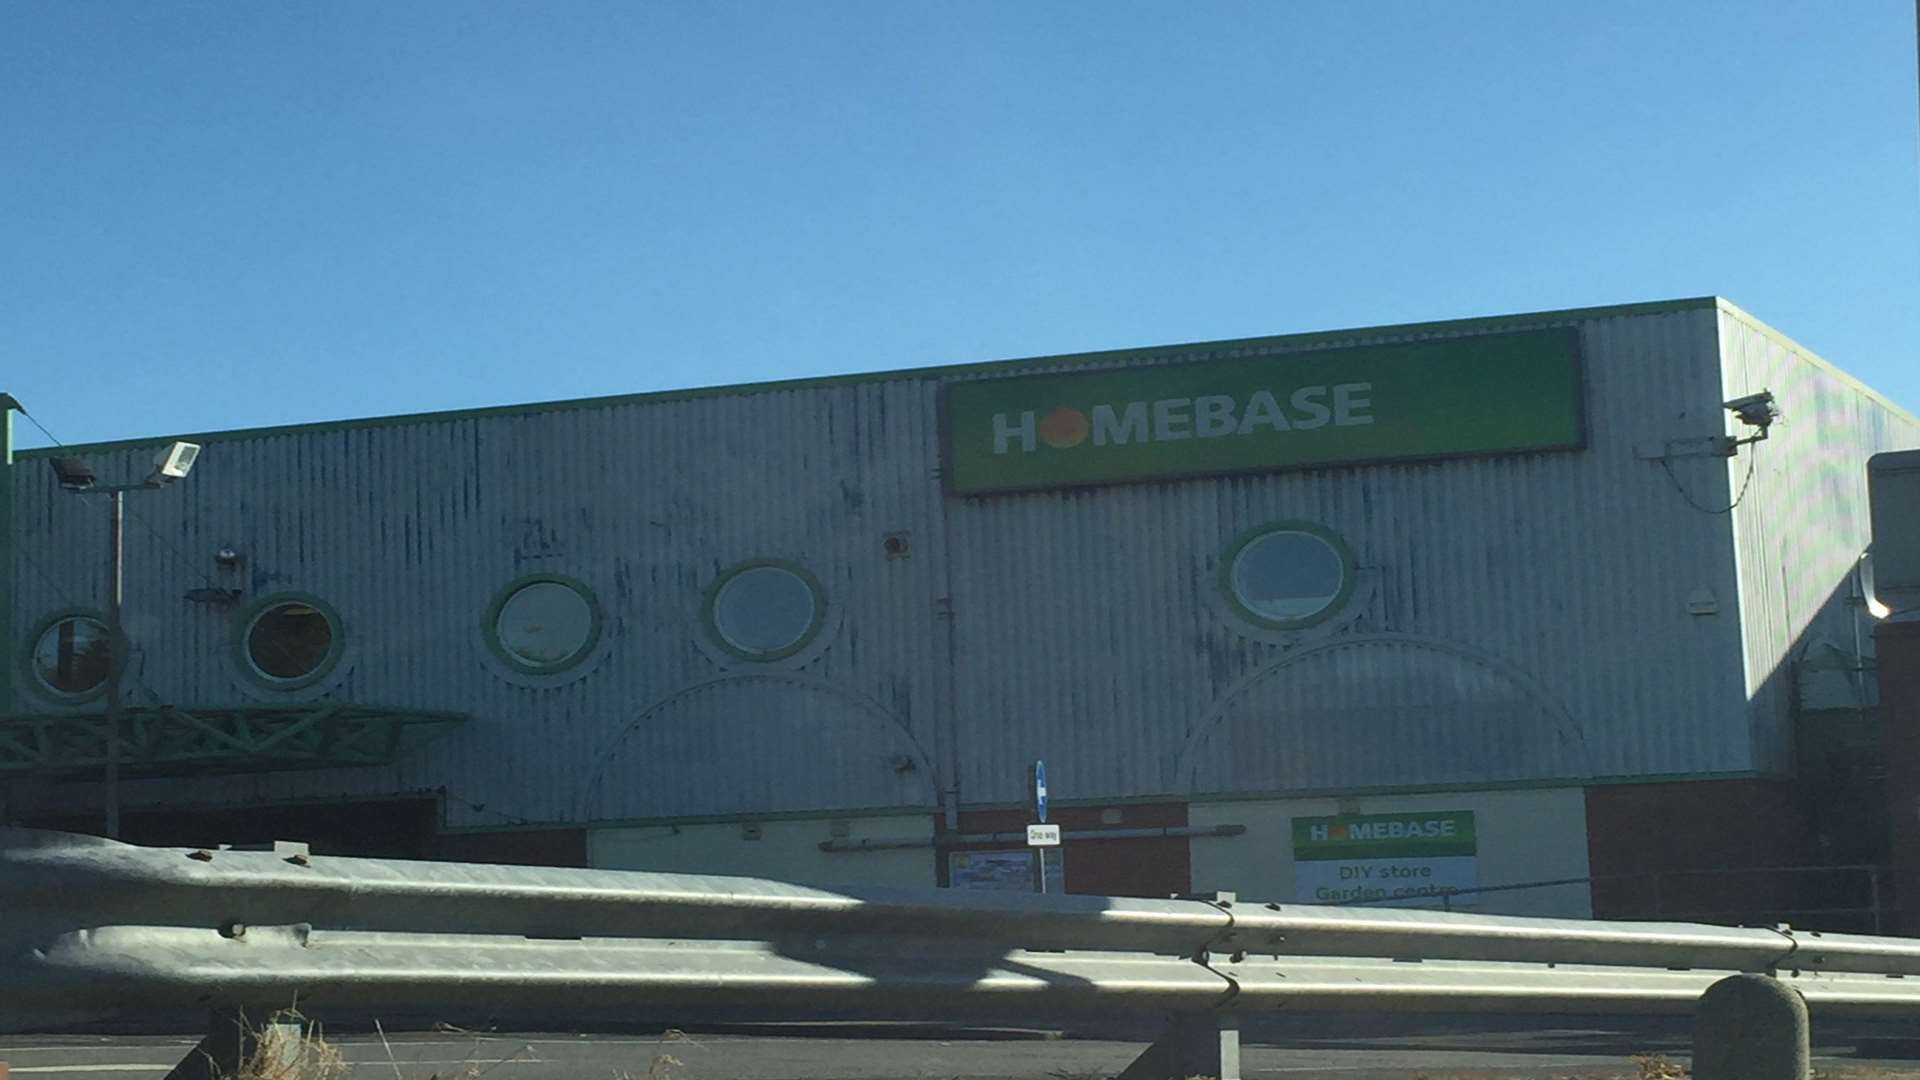 Homebase in Folkestone is set to expand and move into the former B&Q site which has been empty since January